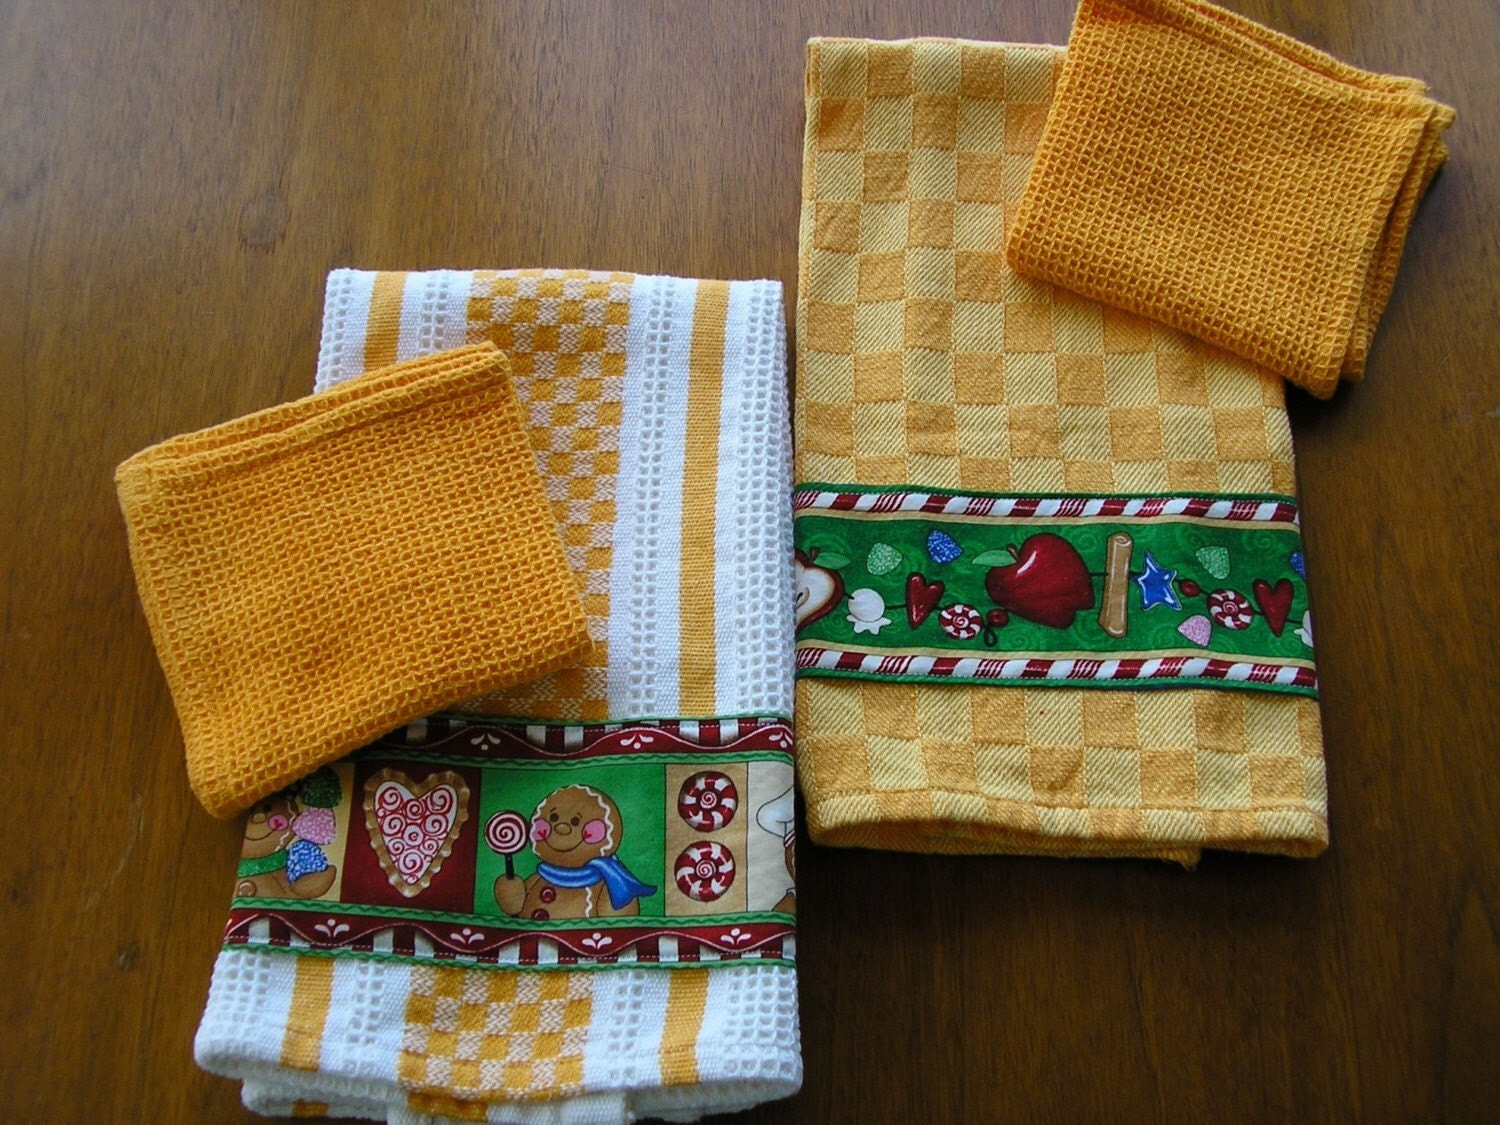 More Holiday Dishcloths to Knit